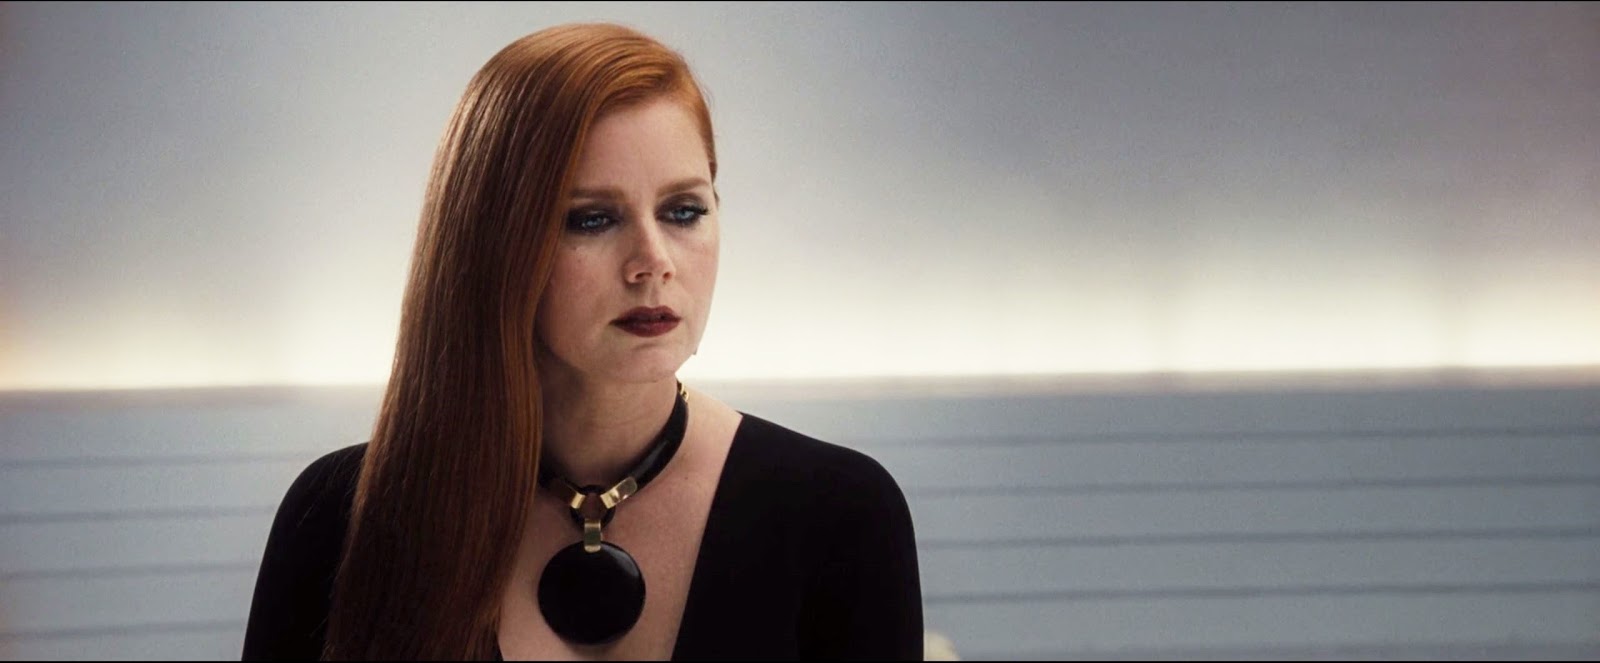 DREAMS ARE WHAT LE CINEMA IS FOR...: NOCTURNAL ANIMALS 2016